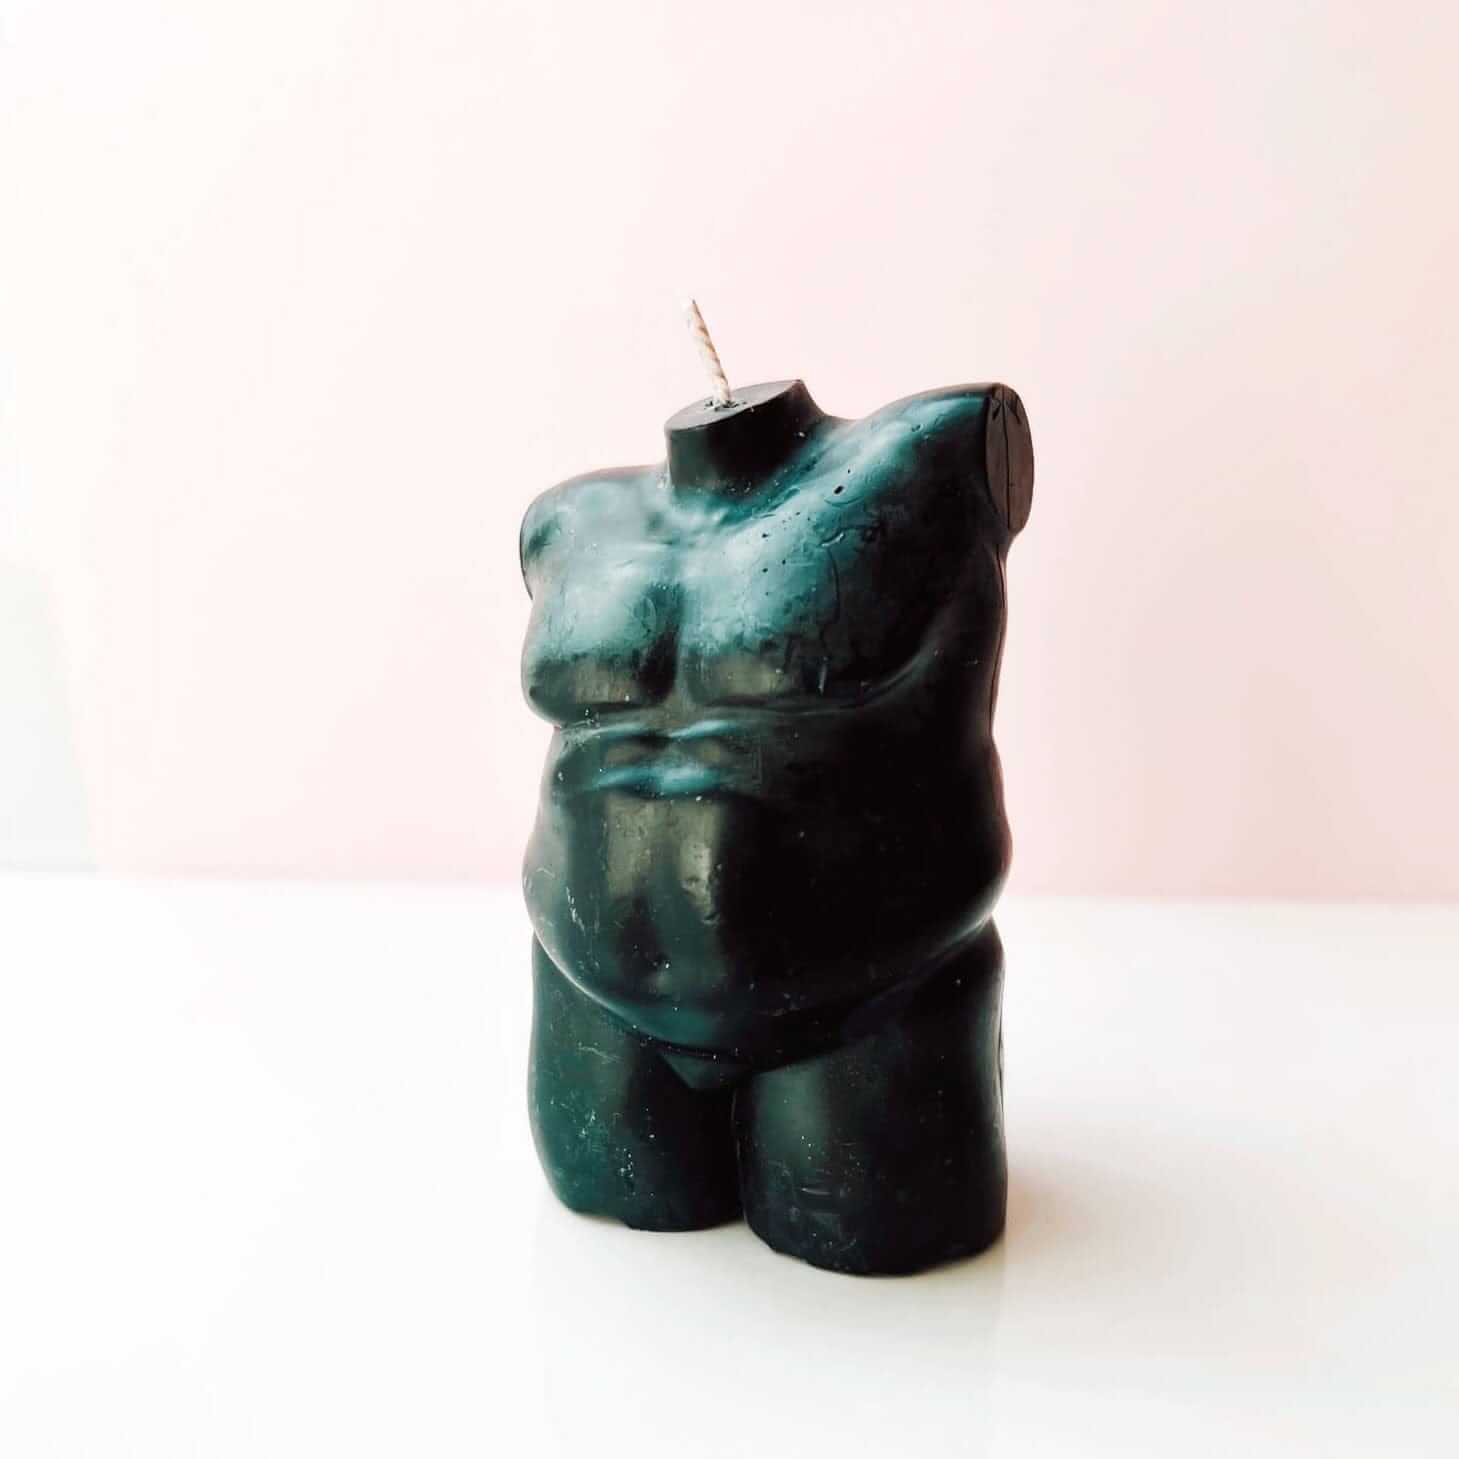 I BODY LOVE Candles Black / Curvy Male Dad Bod Male Body Candle